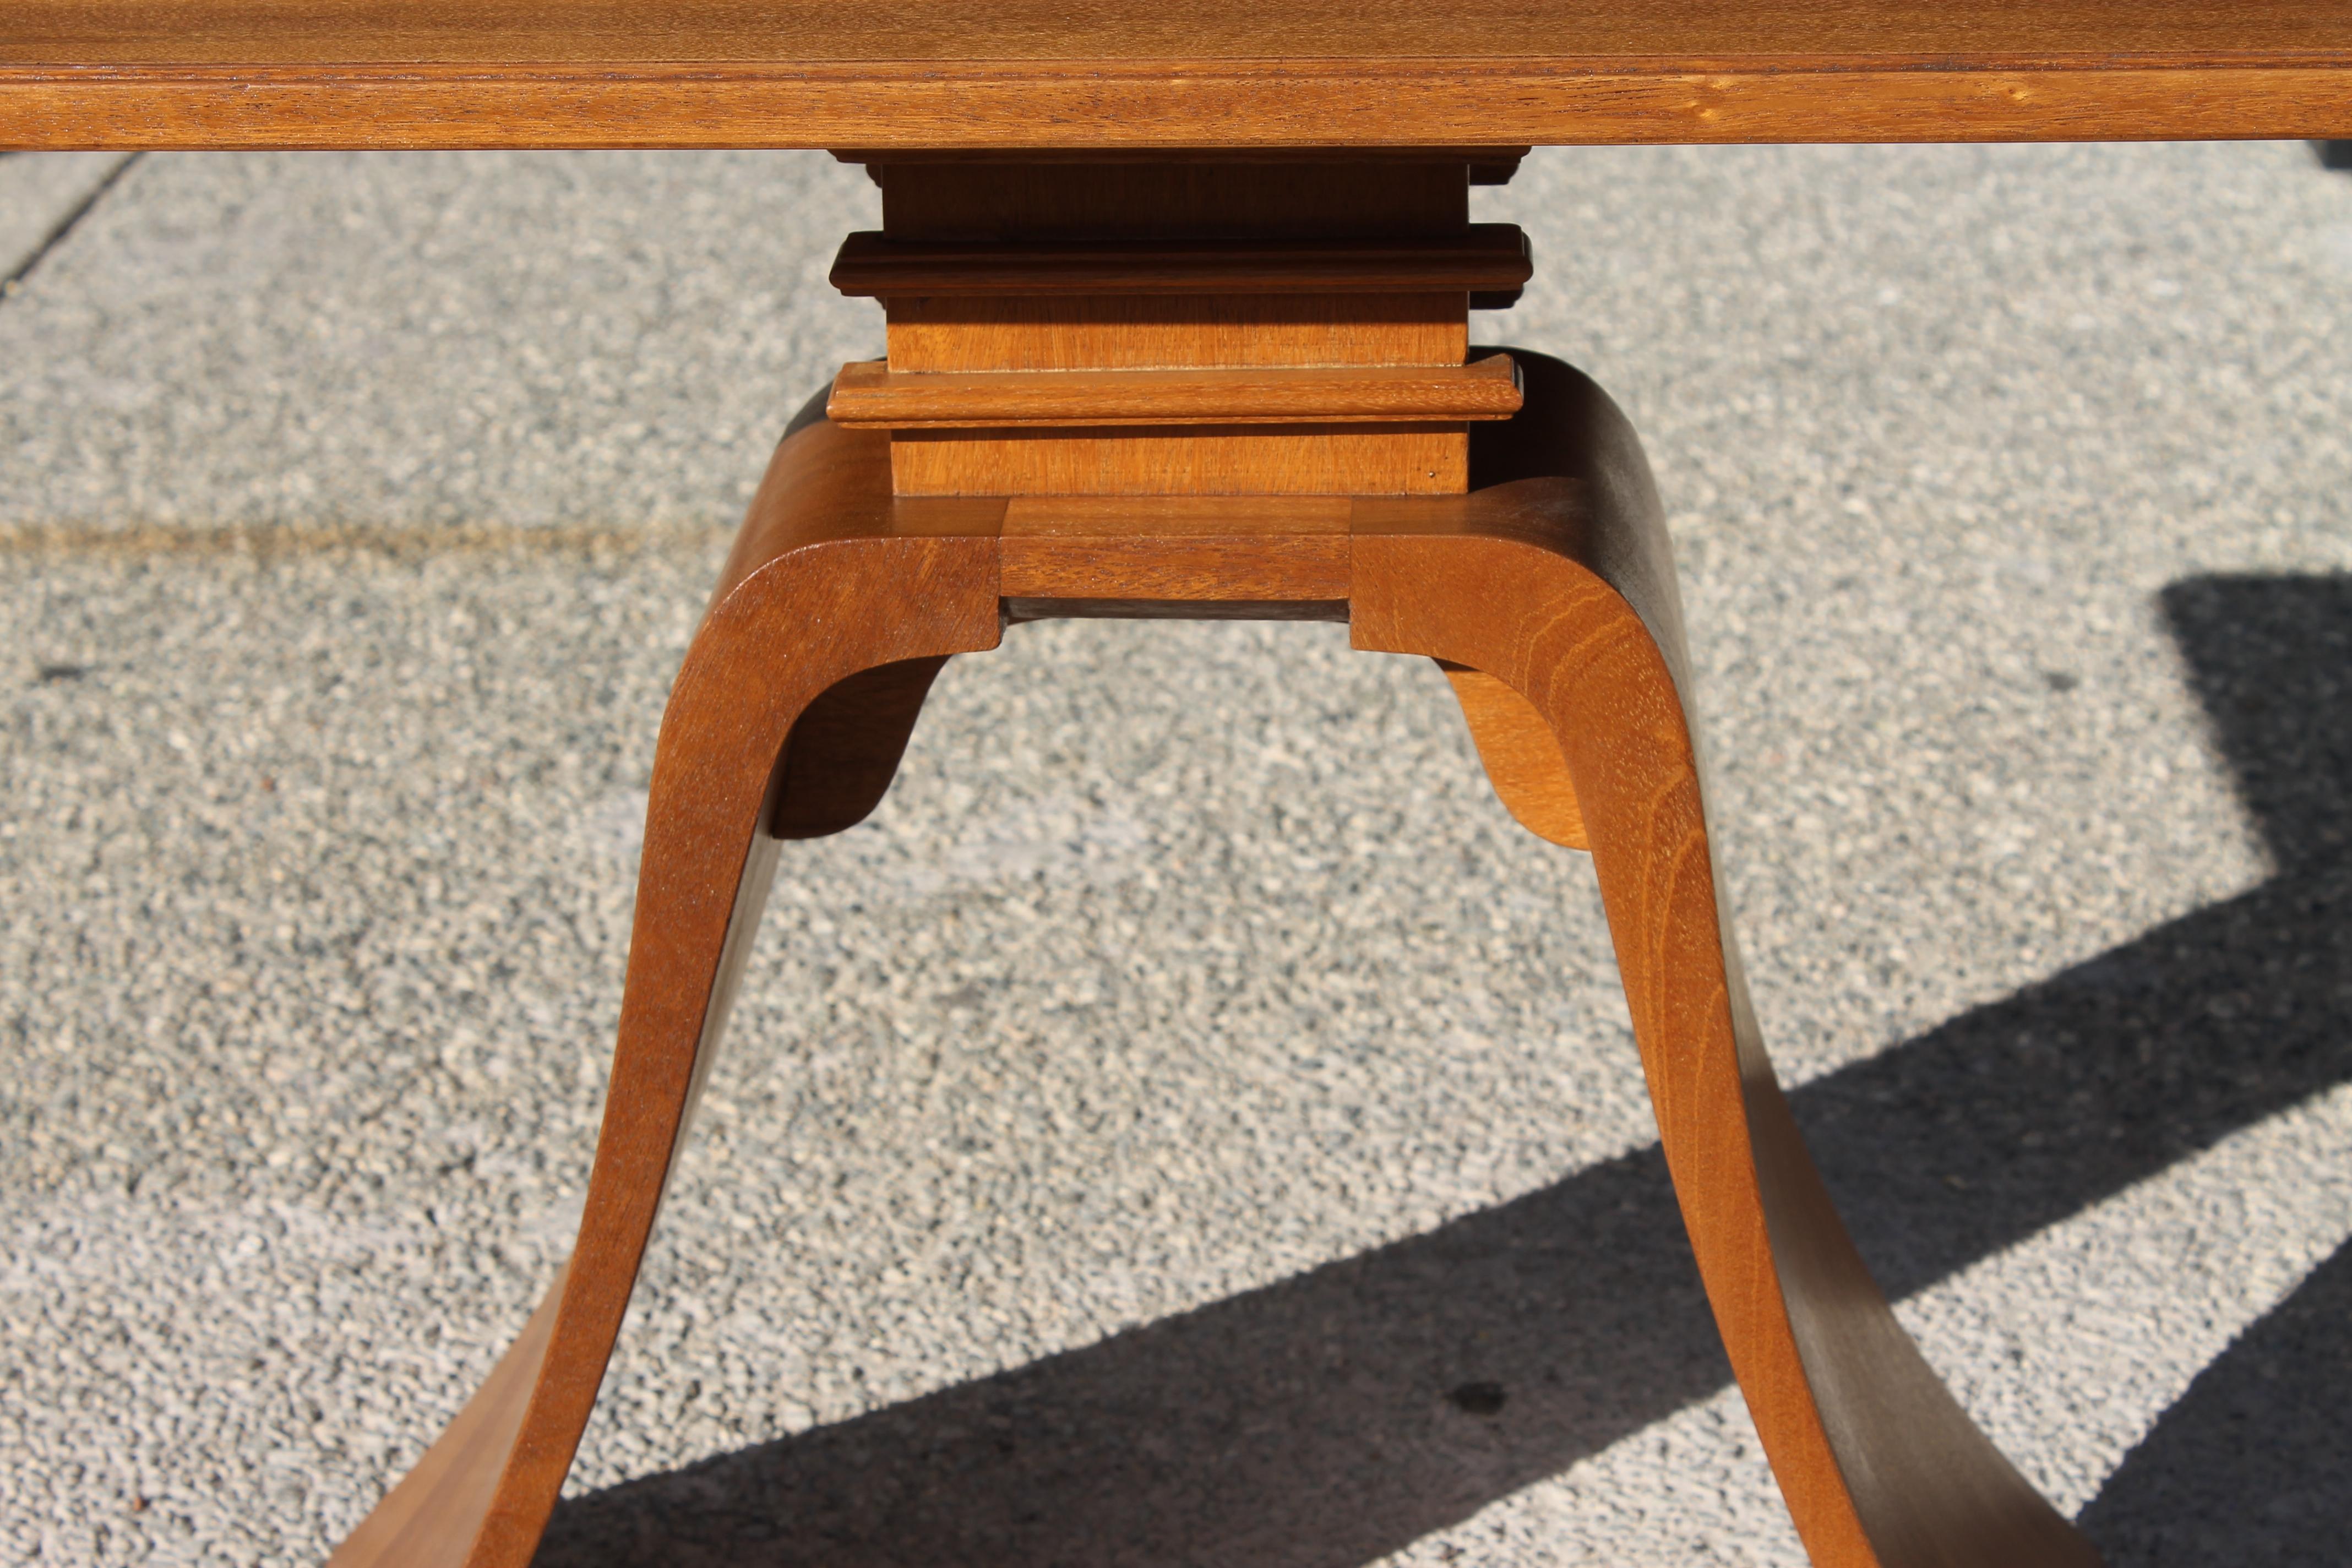 Mahogany side table or console by Paul Frankl for Brown Saltman. Table measures: 28